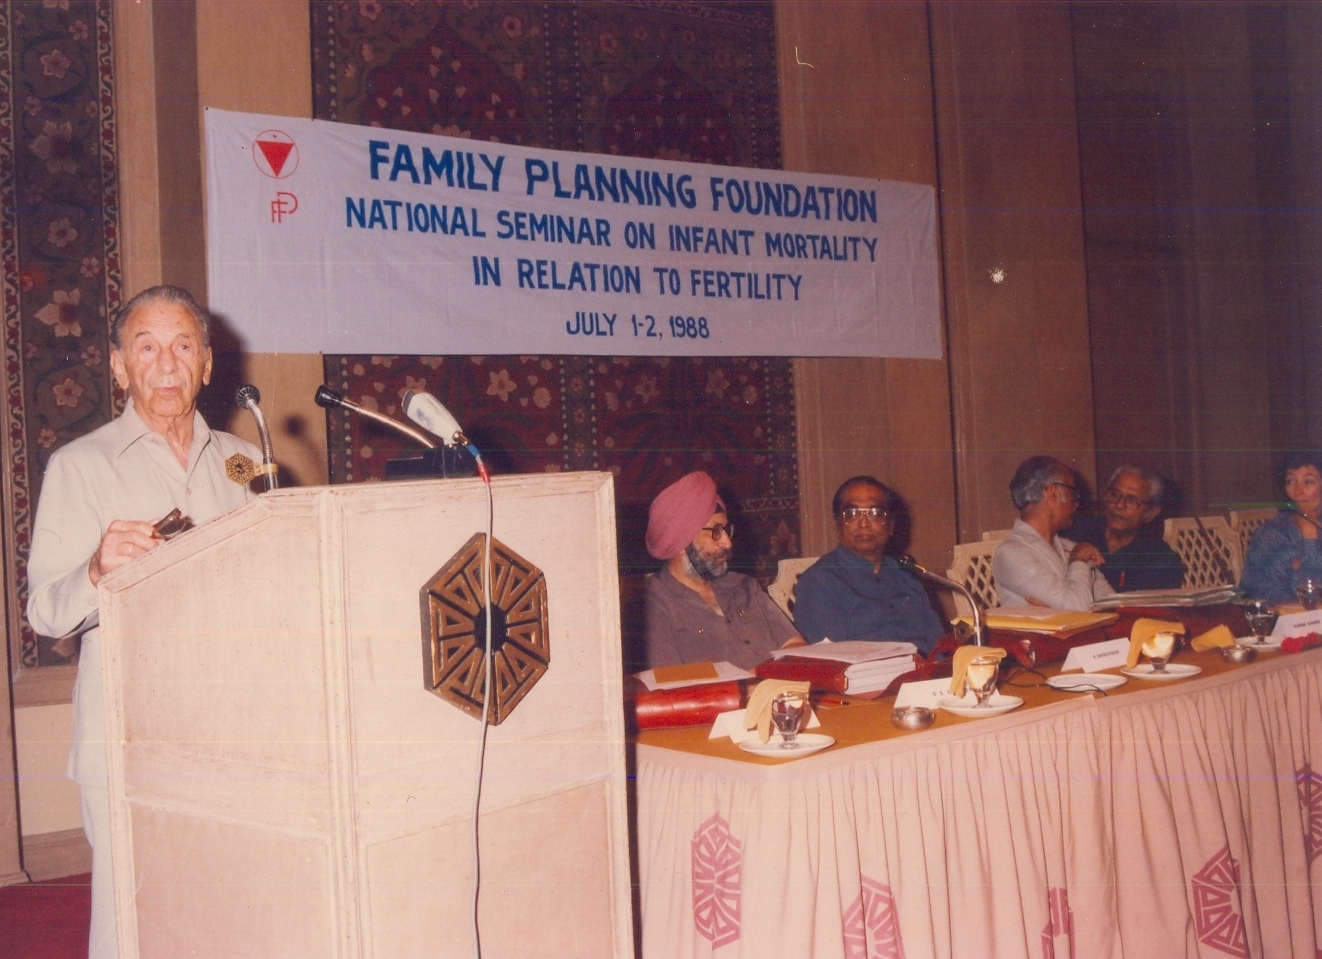 Looking Beyond Family Planning